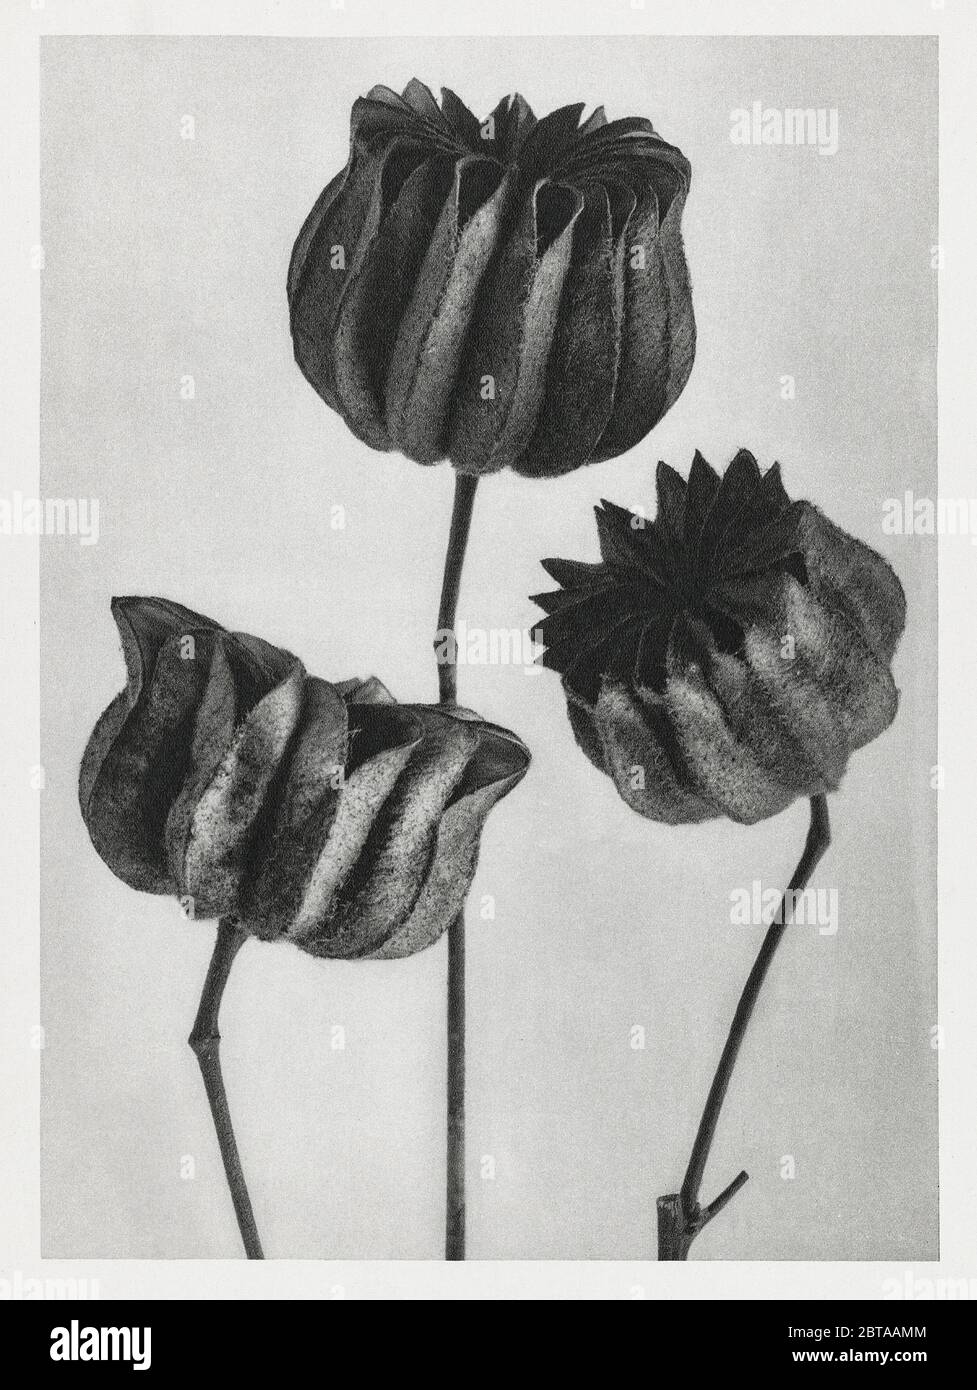 vintage, retro, old, photograph, century, botany, graphics, antique, classic, history, historic, historical, archival, archive, lifestyles, nostalgia, nostalgic, old-fashioned, old-fashion, popular, bw, black and white, past, past times, past time, sepia, floral, 19th, historic photographs, art, image, colorful, art, painting, fineart, drawing, asar studios, portrait, landscape, people, nature, joy, happiness, figure, studio, botanical, flower, hand colored, print, ancestral Stock Photo